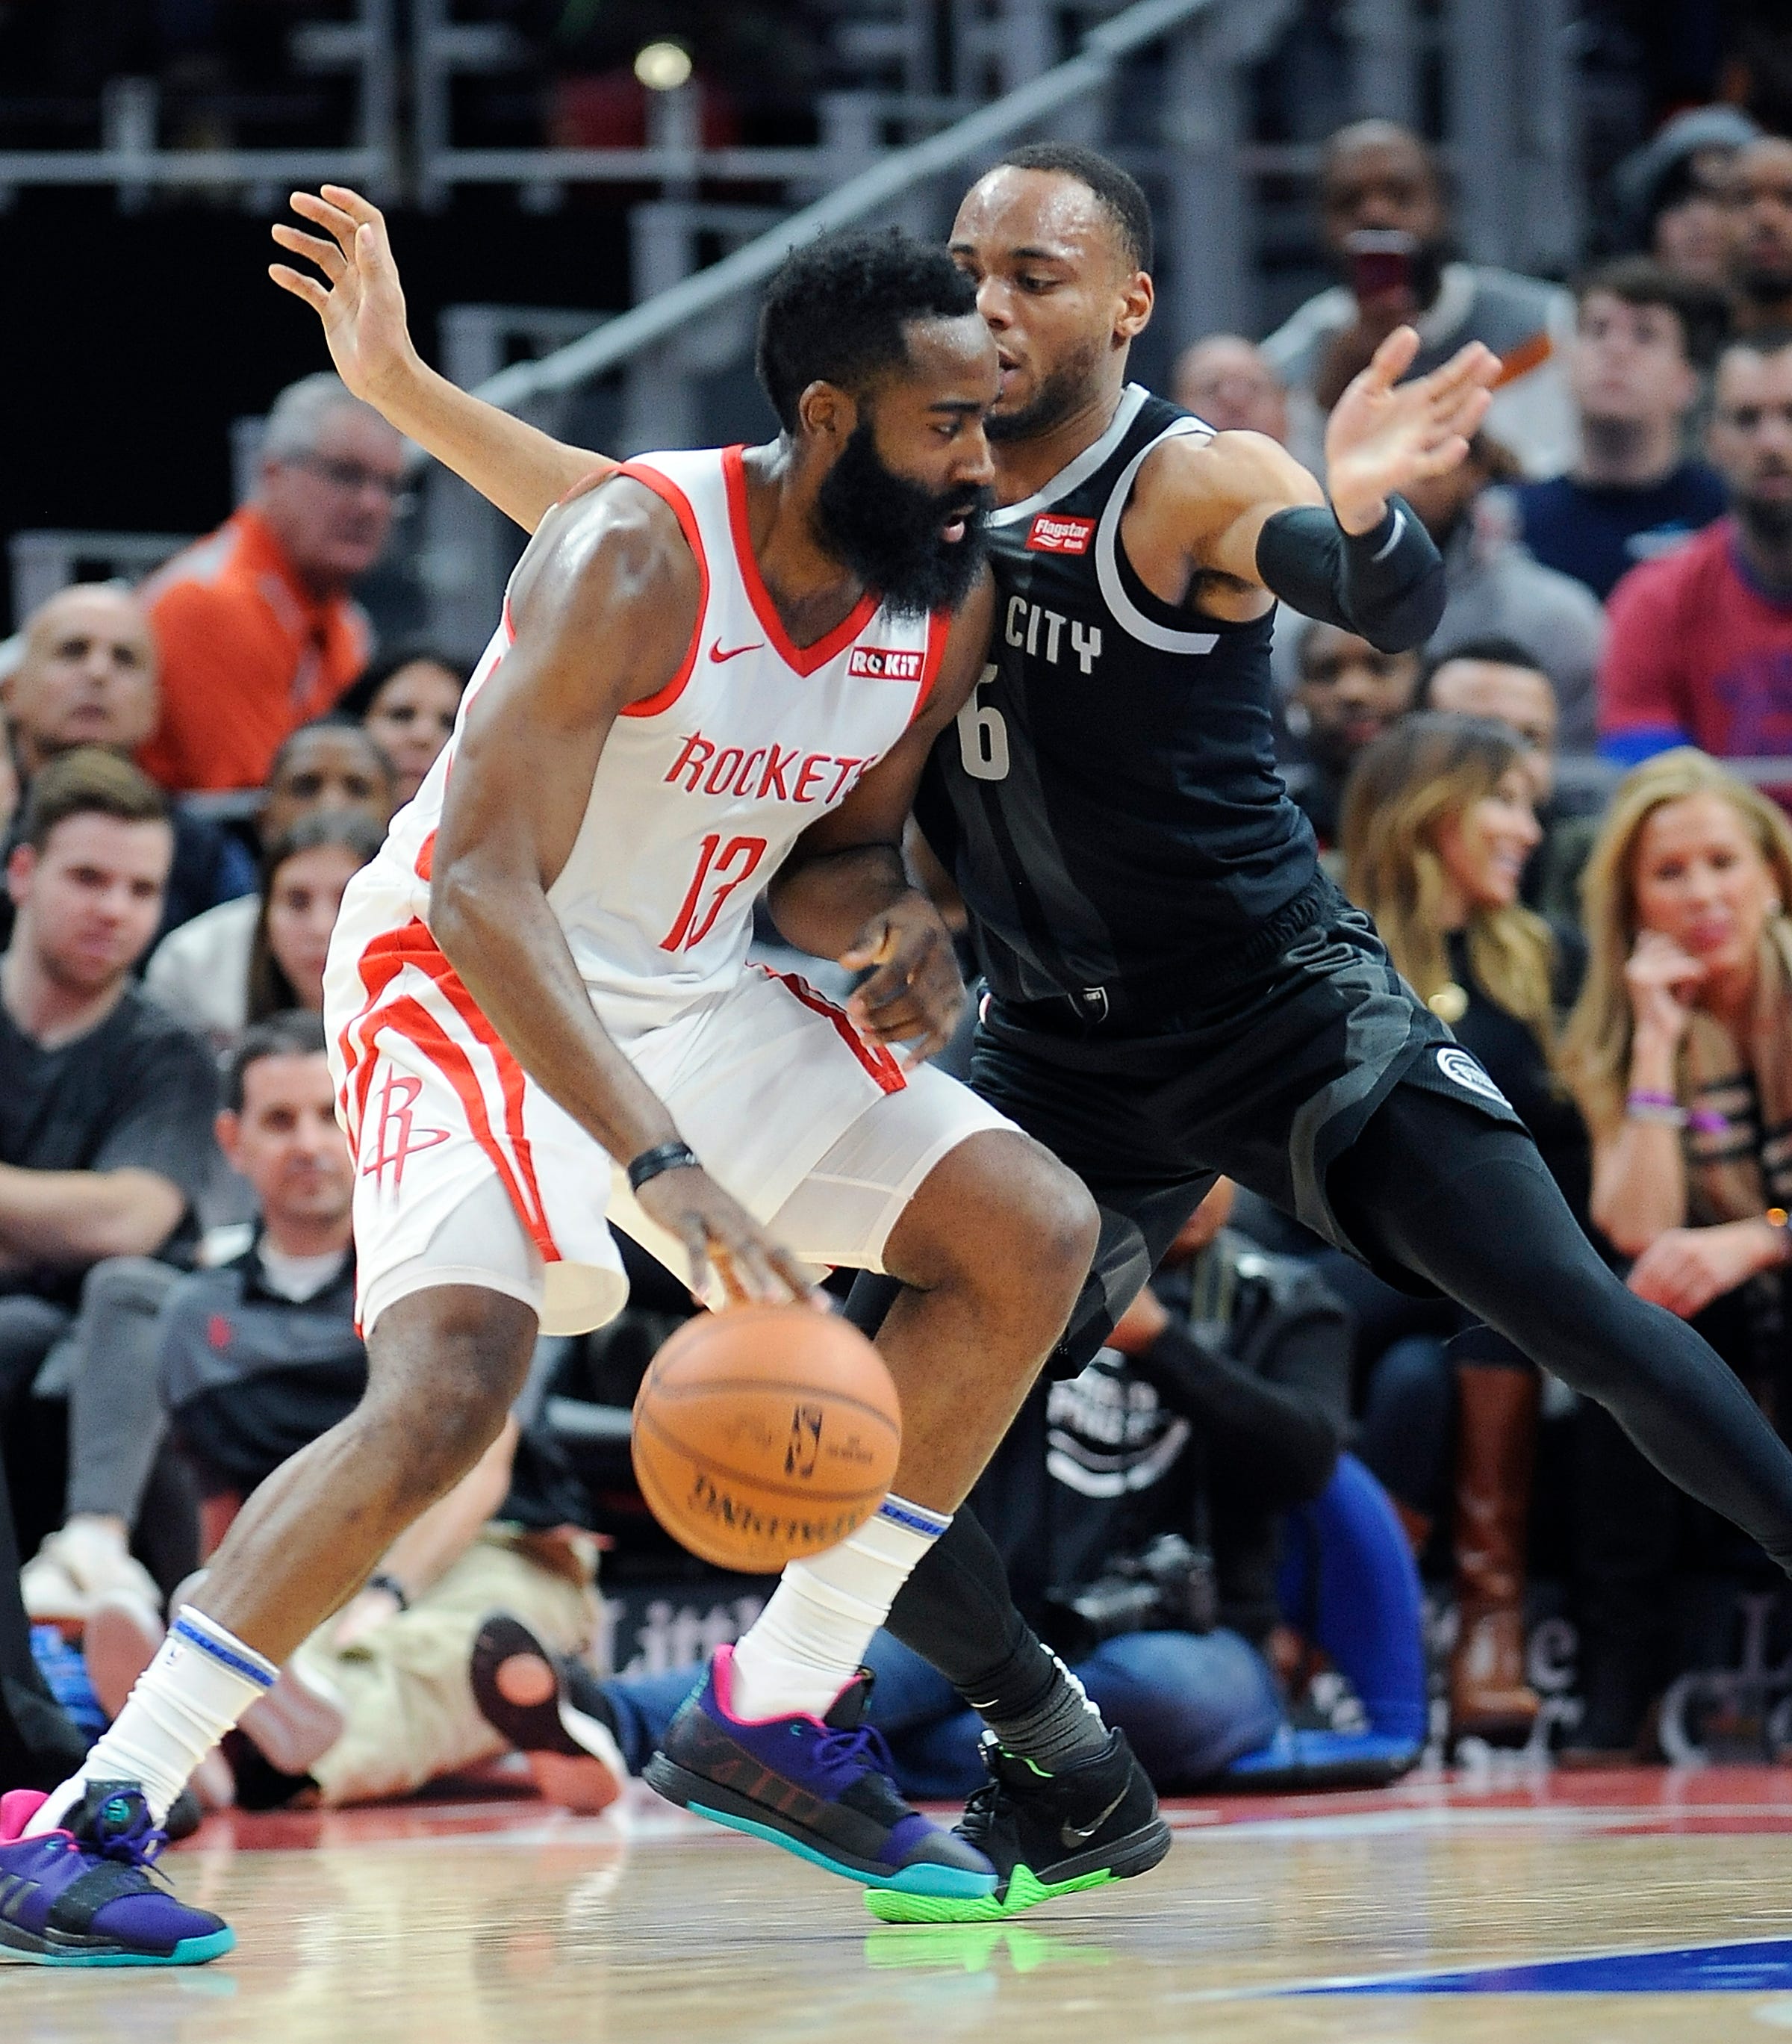 Pistons' Bruce Brown defends Rockets' James Harden in the second quarter.